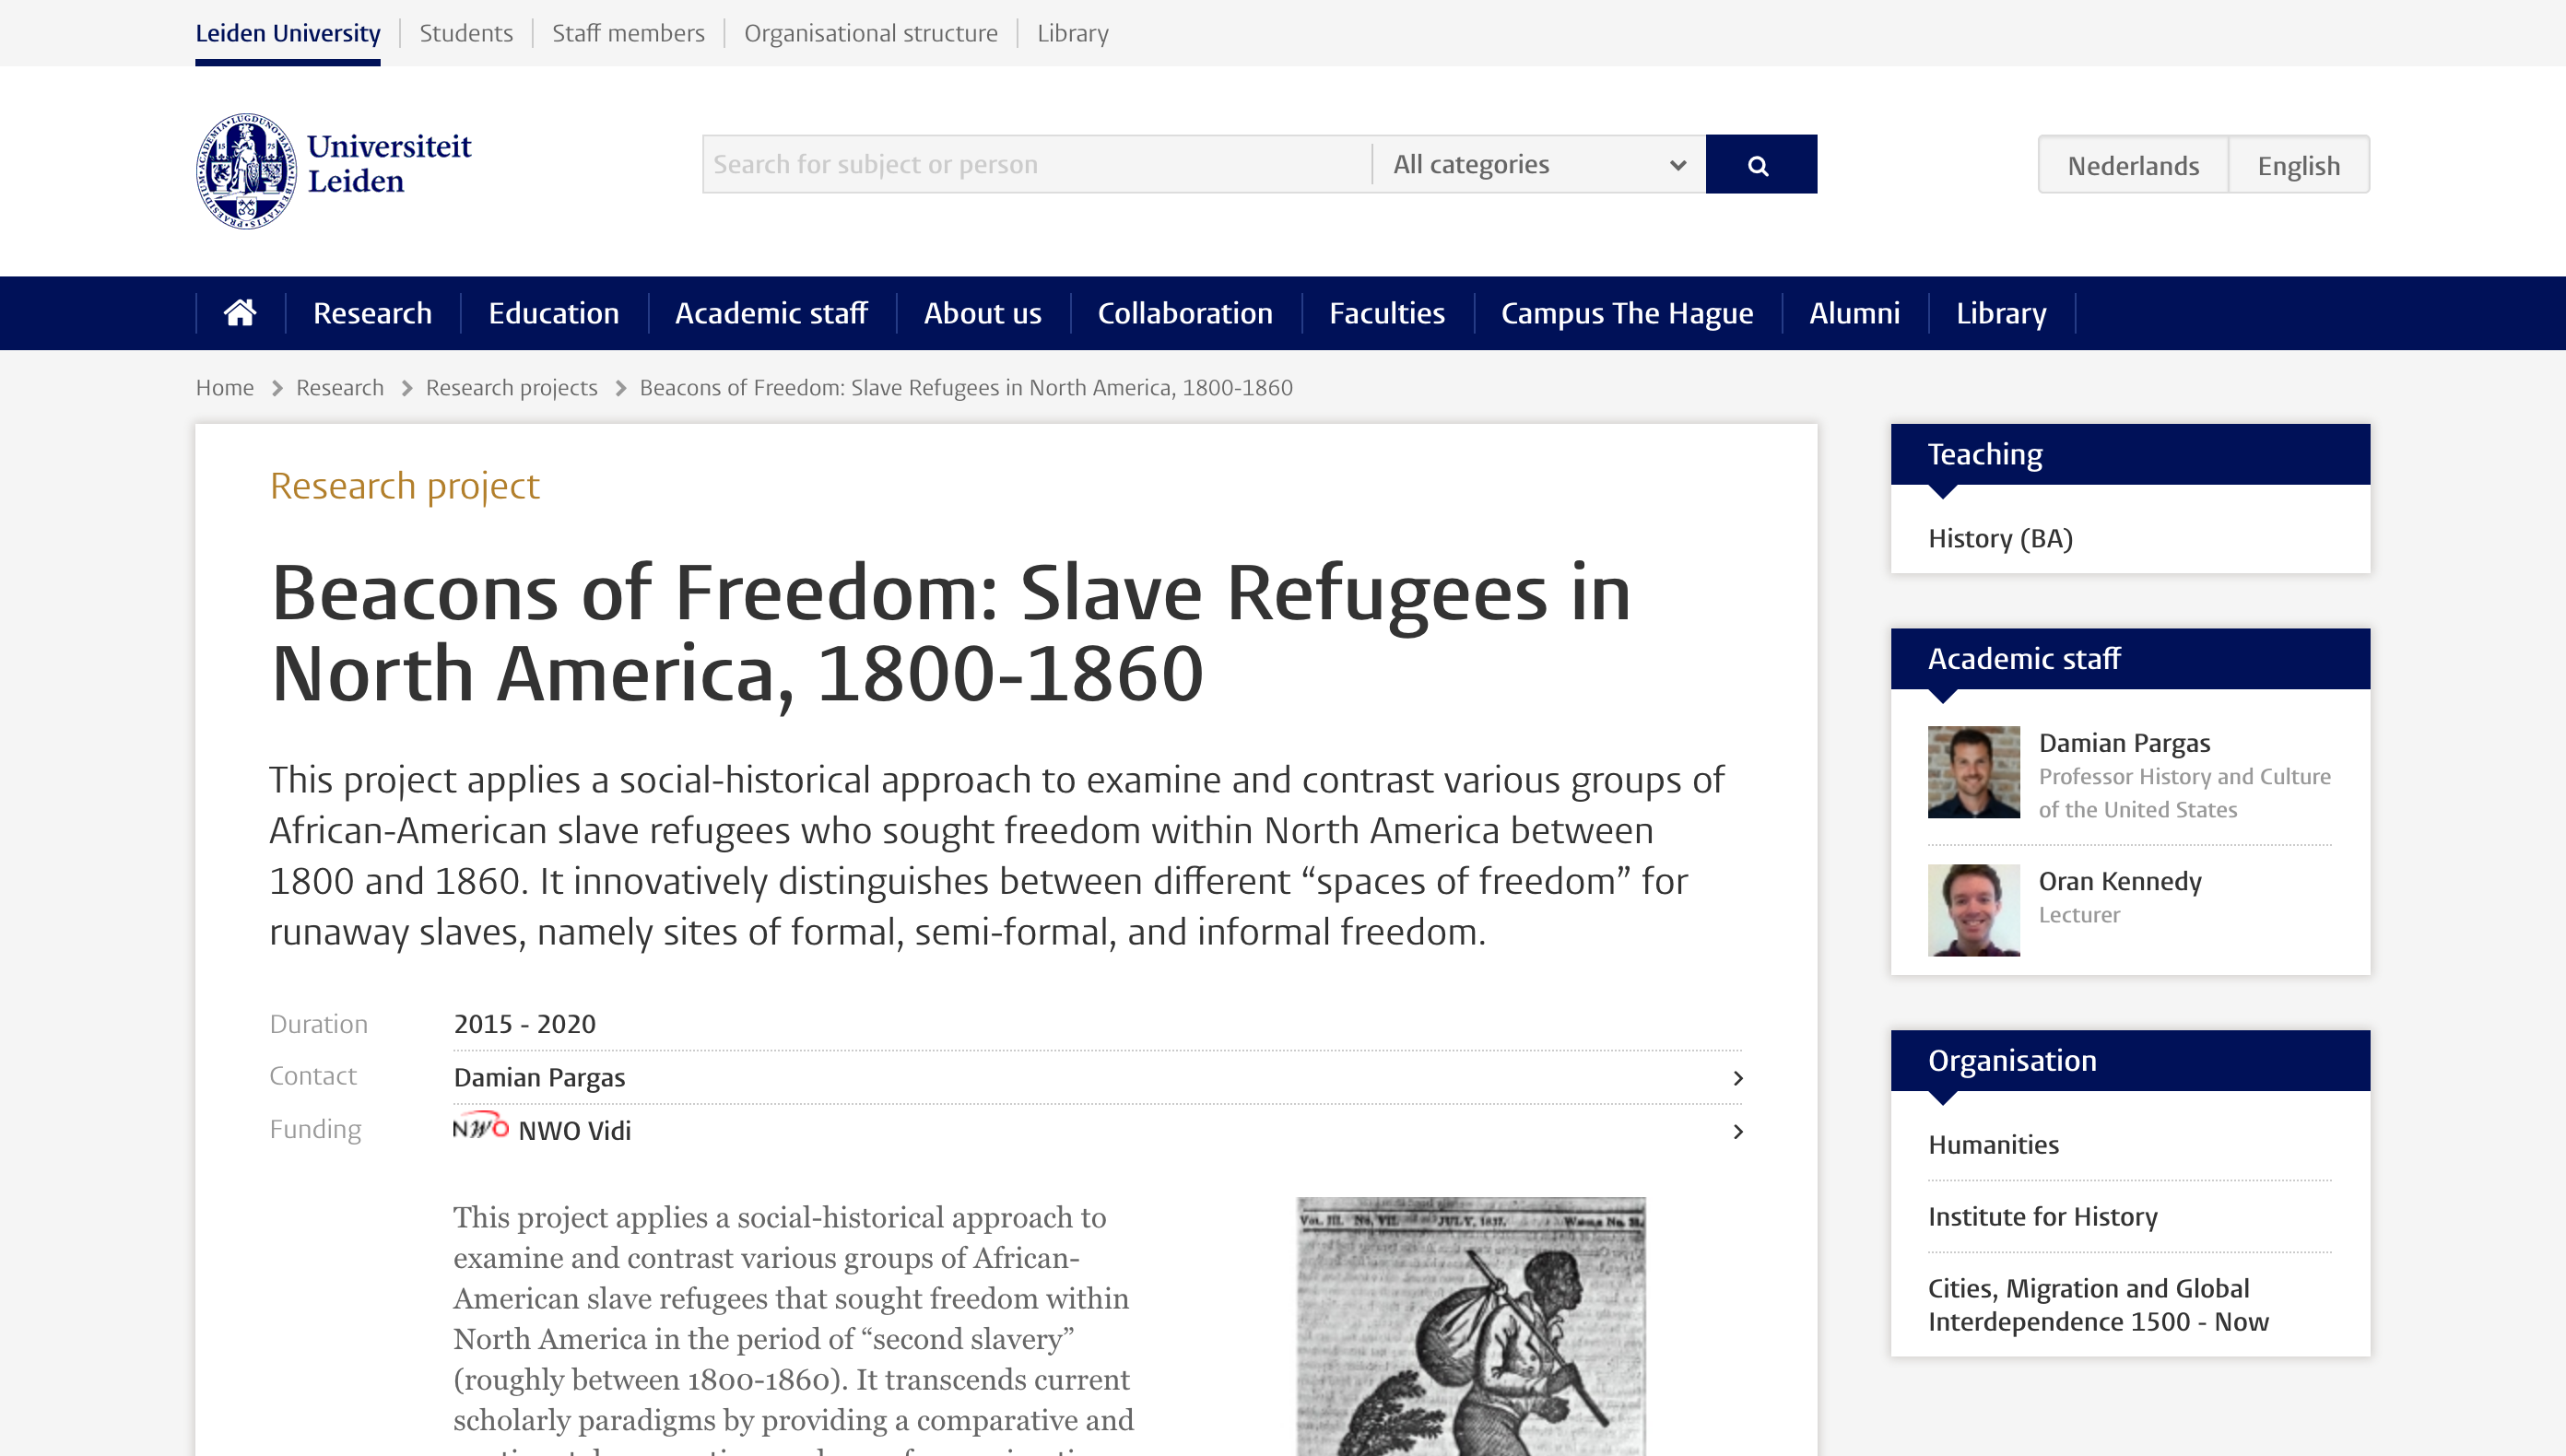 Beacons of Freedom: Slave Refugees in North America 1800-1860